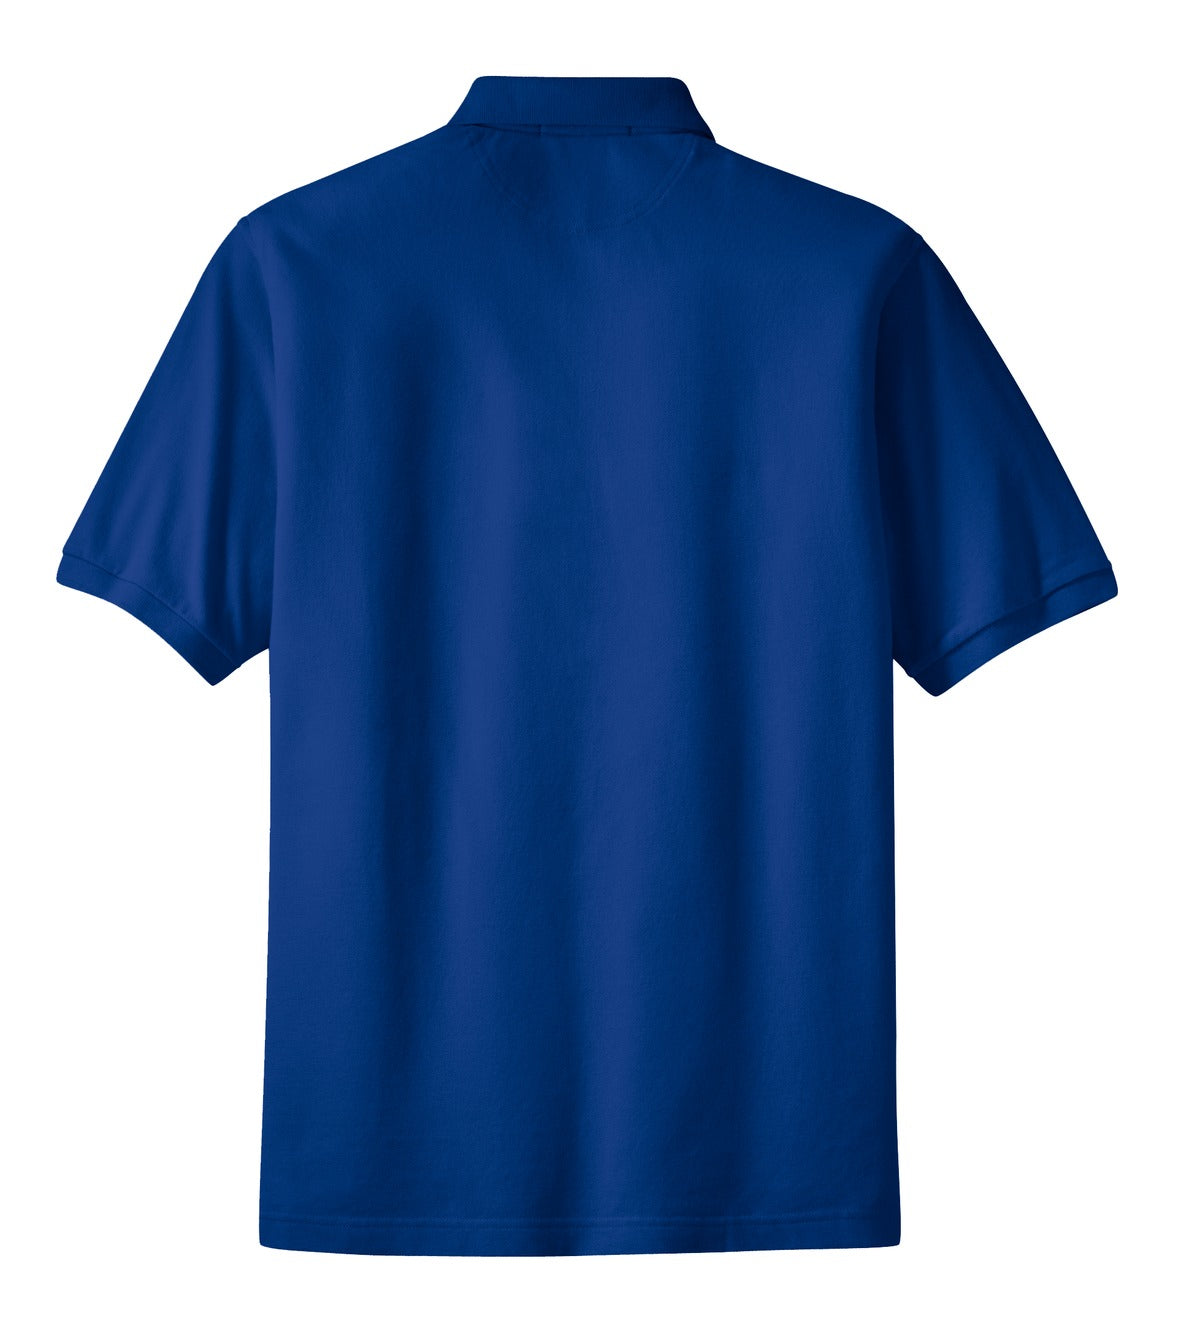 Port Authority Heavyweight Cotton Pique Polo with Pocket. K420P